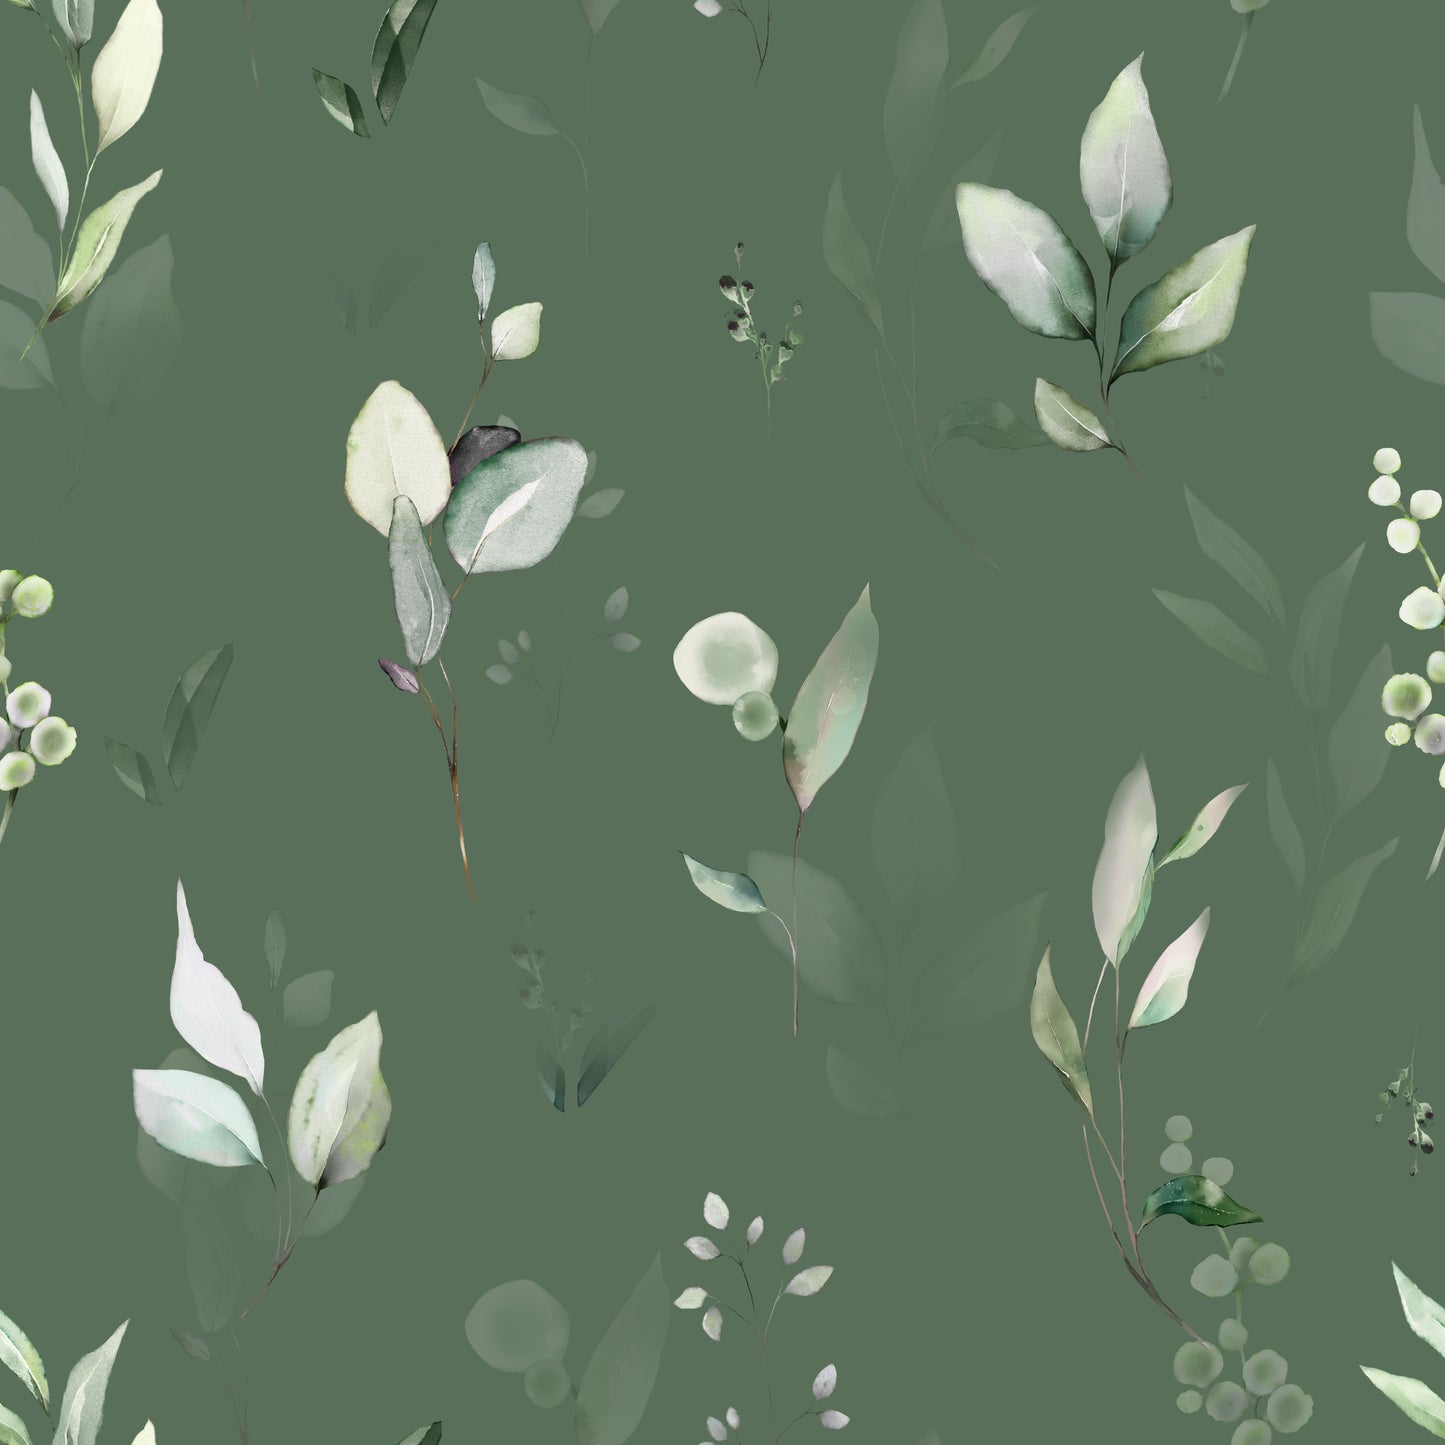 Whimsical green water colour greenery print on green background easy to install and remove peel and stick custom wallpaper available in different lengths/sizes locally created and printed in Canada wallpaper. Washable, durable, commercial grade, removable and waterproof.